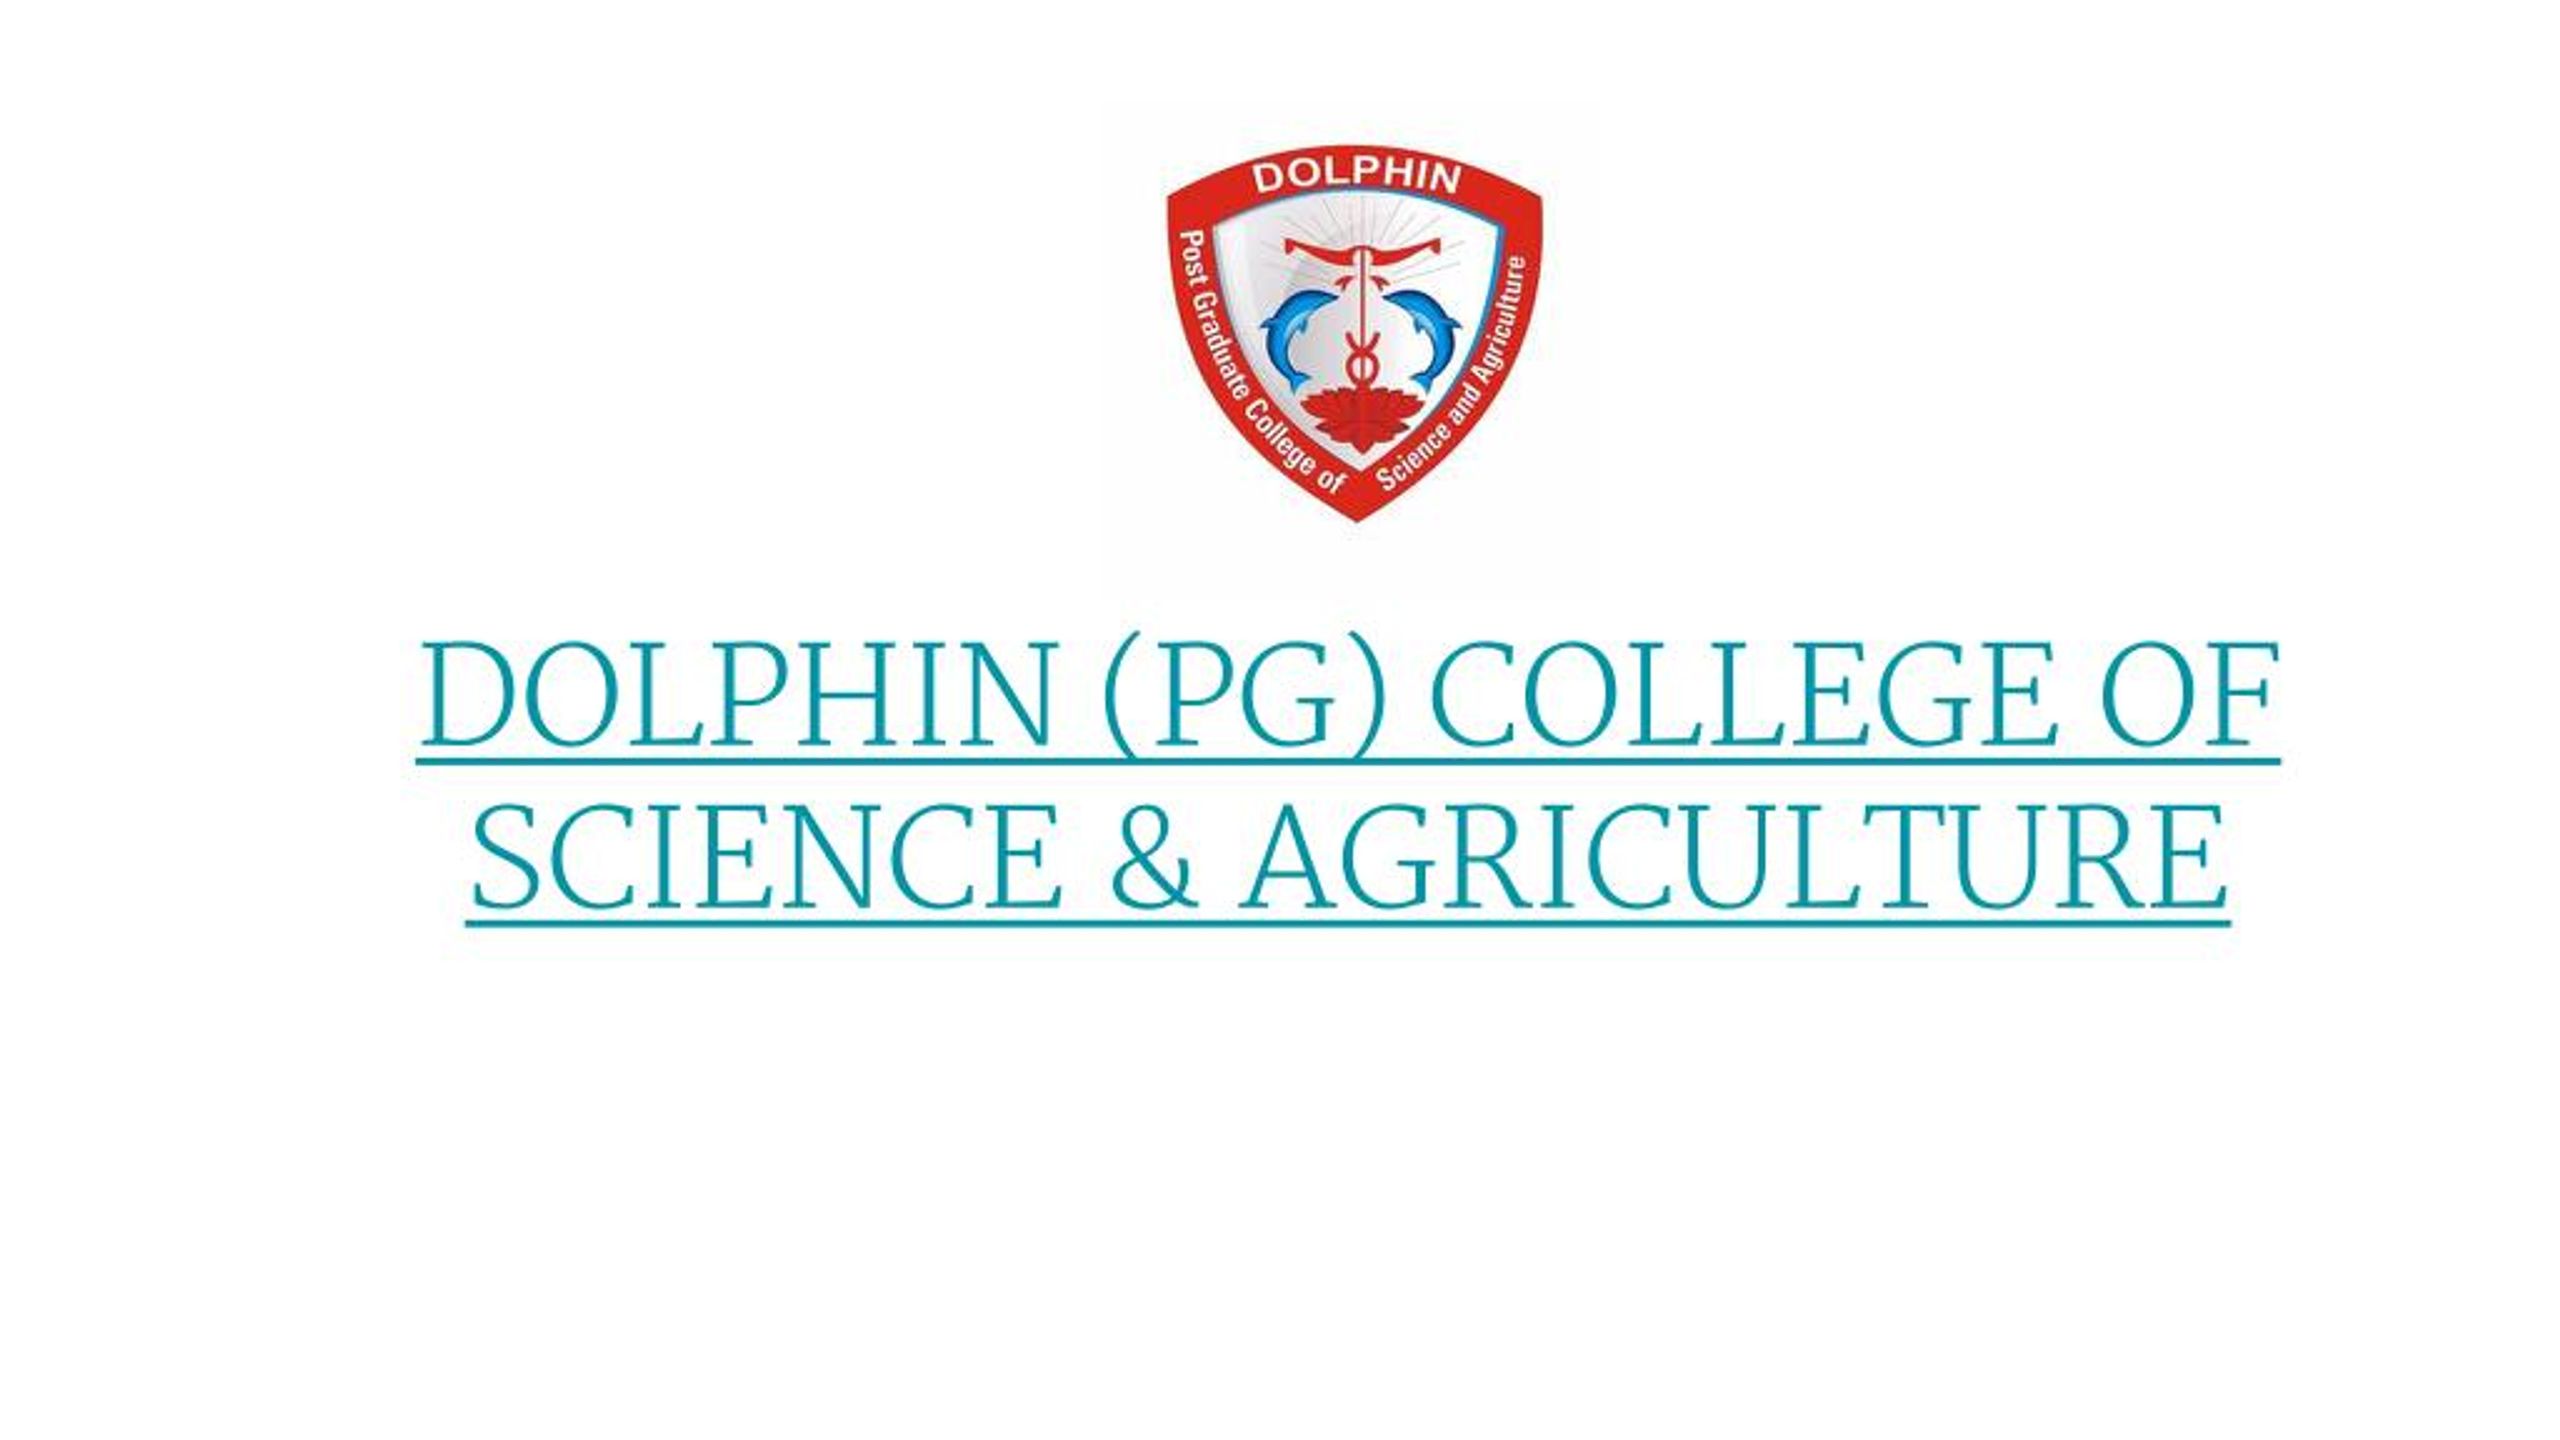 bsc agriculture admission 2019